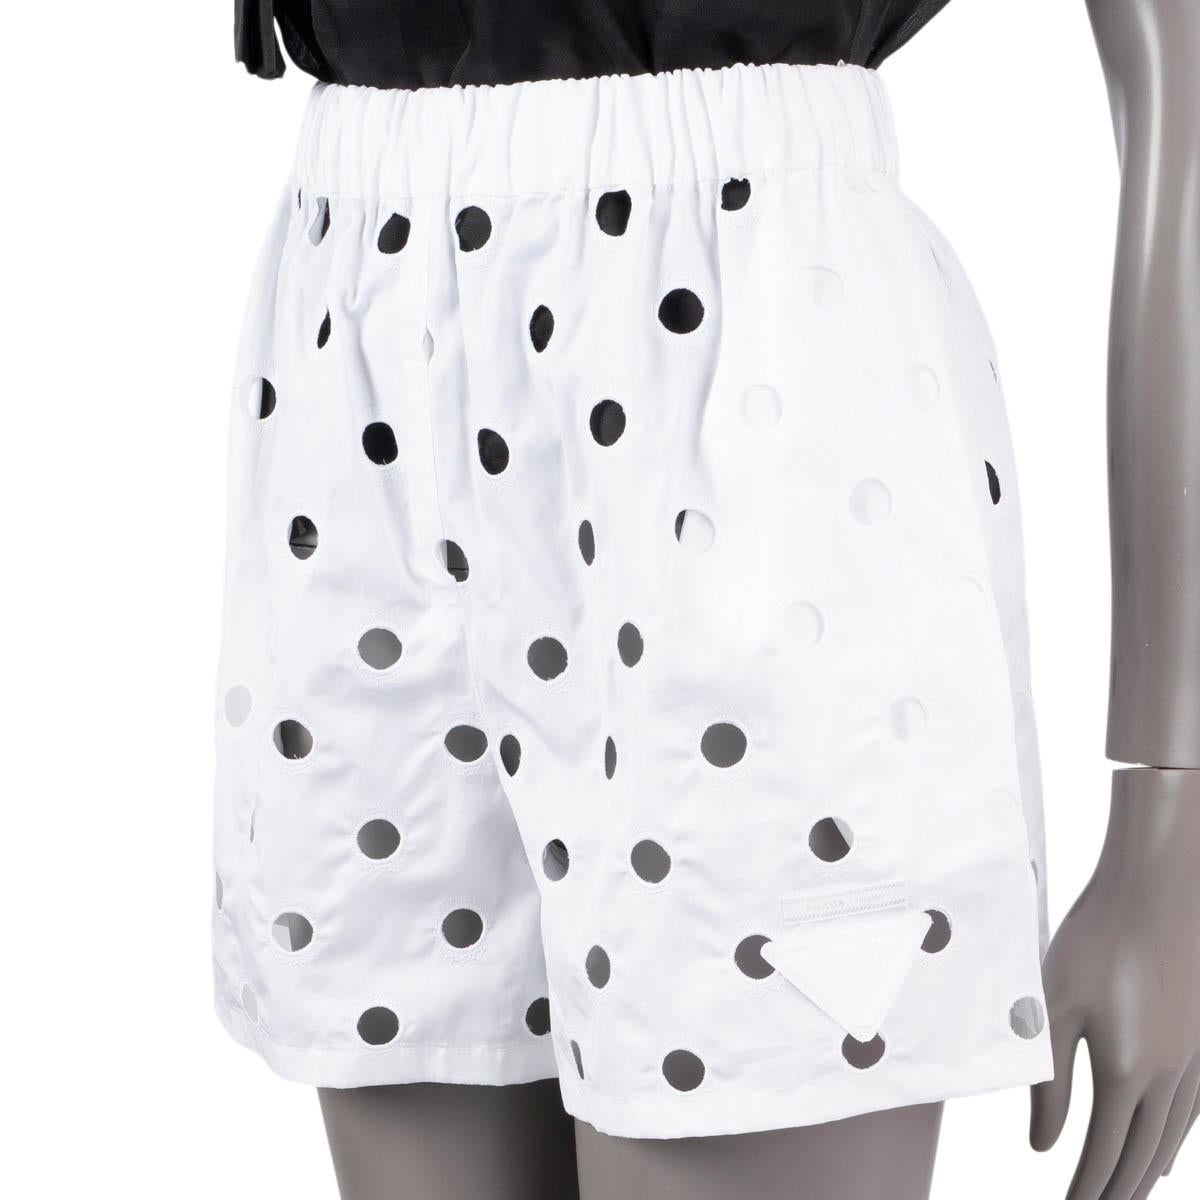 PRADA x RAF SIMONS white cotton 2021 PERFORATED Mini Shorts Pants 40 S In Excellent Condition For Sale In Zürich, CH